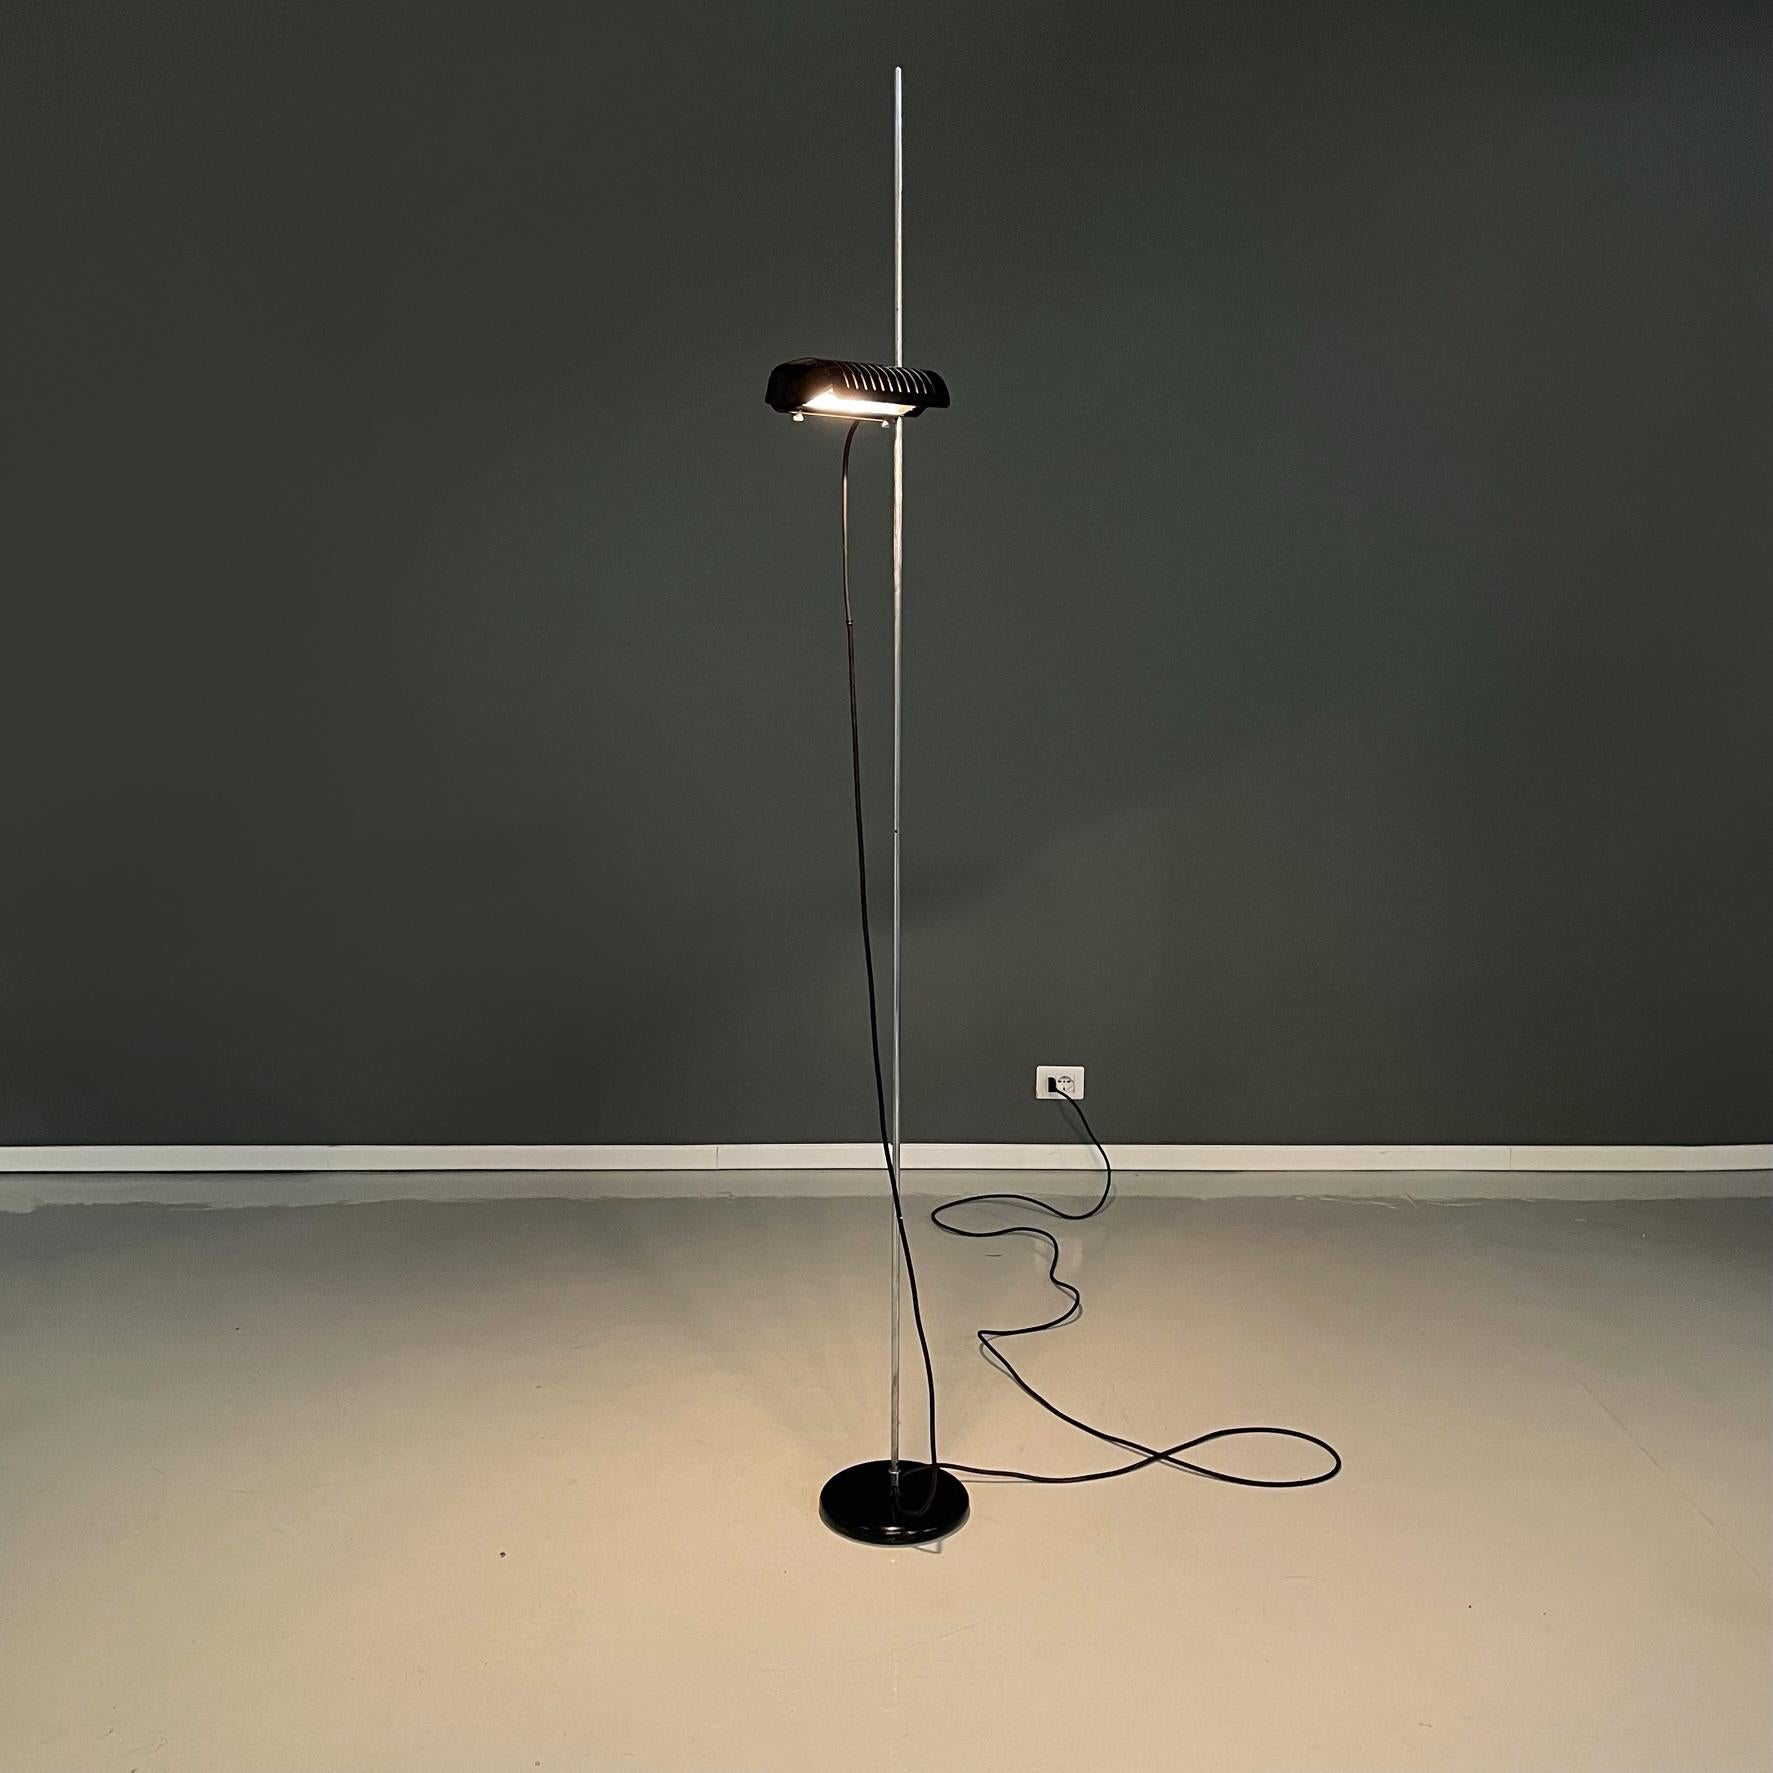 Italian modern Adjustable floor lamp mod. Alogena 626L by Joe Colombo for Oluce, 1970s
Adjustable floor lamp mod. Alogena 626 with round base in black painted metal. The central structure is made up of a tubular in chromed metal . The adjustable